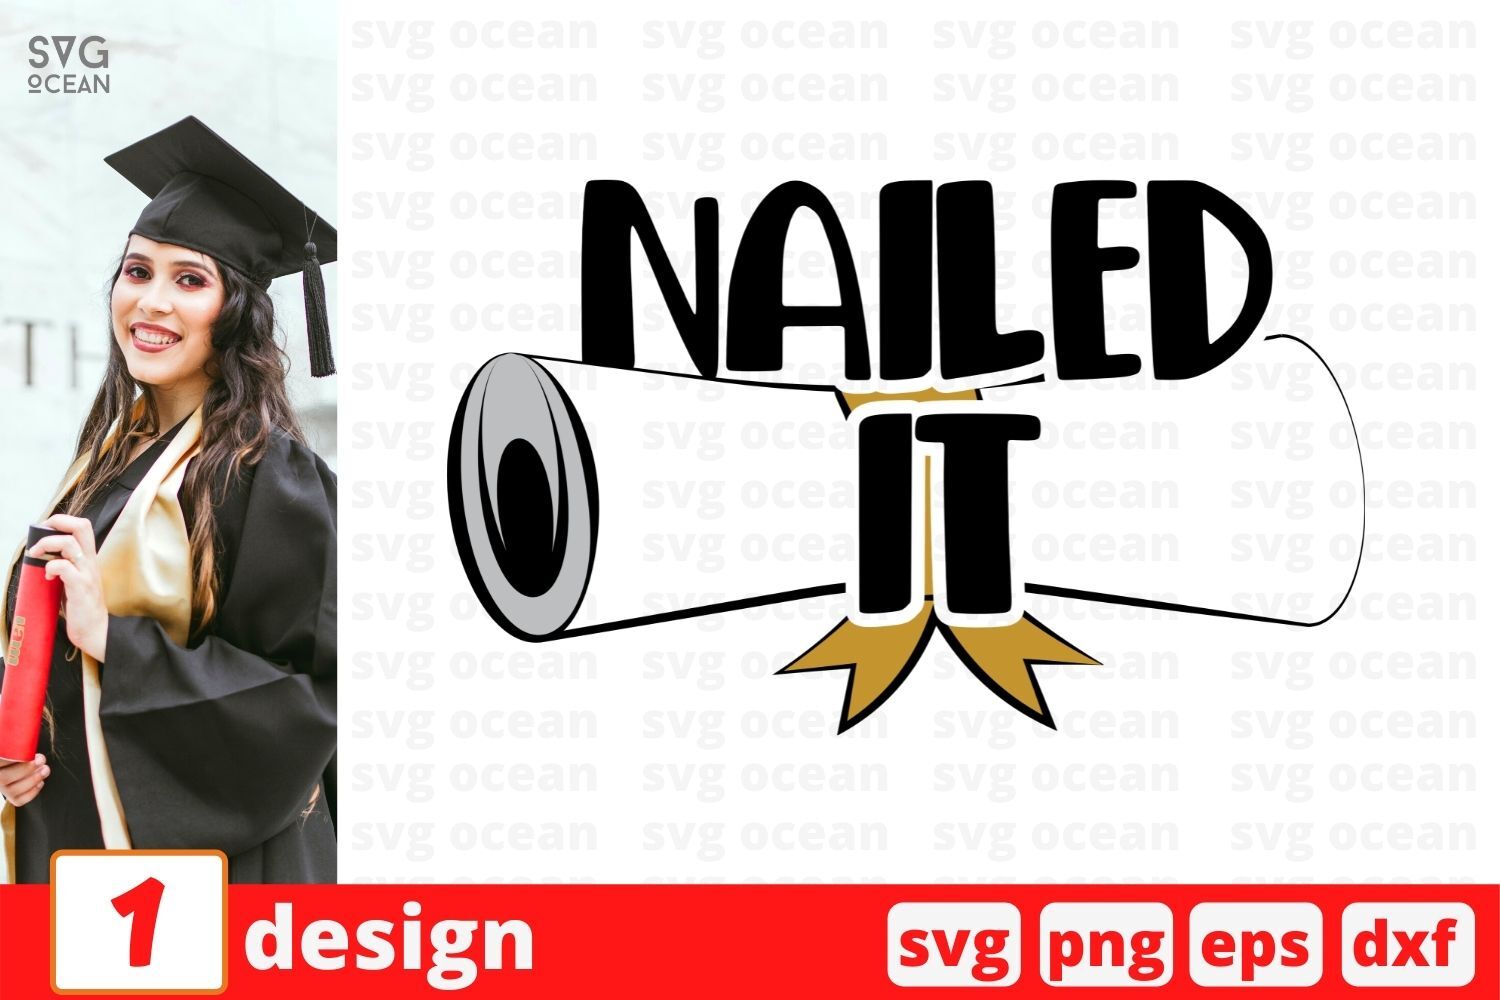 Nailed it SVG Cut File By SvgOcean | TheHungryJPEG